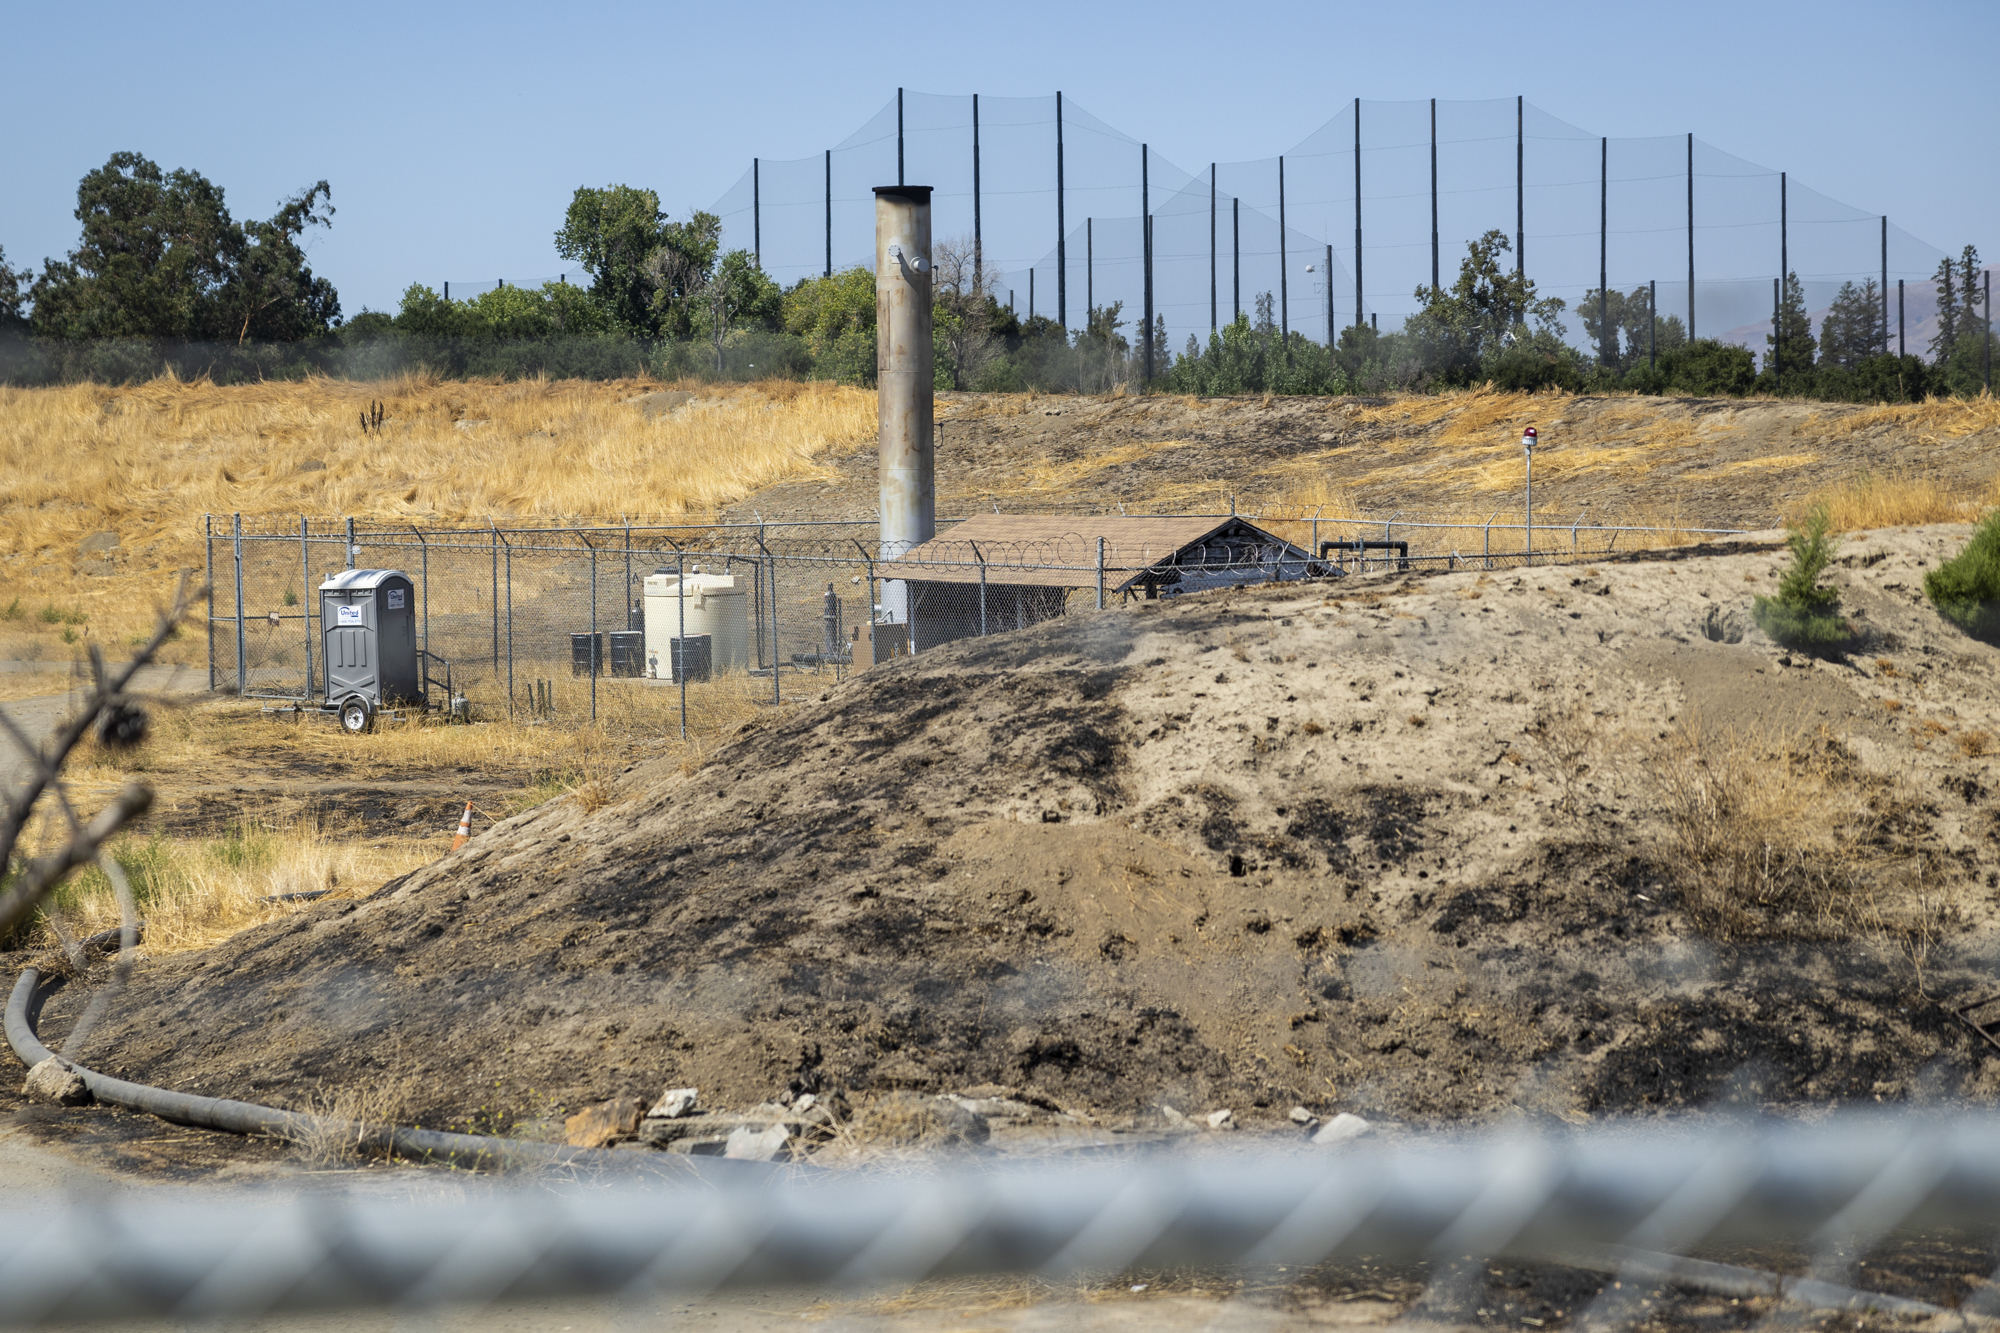 A small structure with a large smokestack is seen from behind a chainlink fence in the center of a large field.